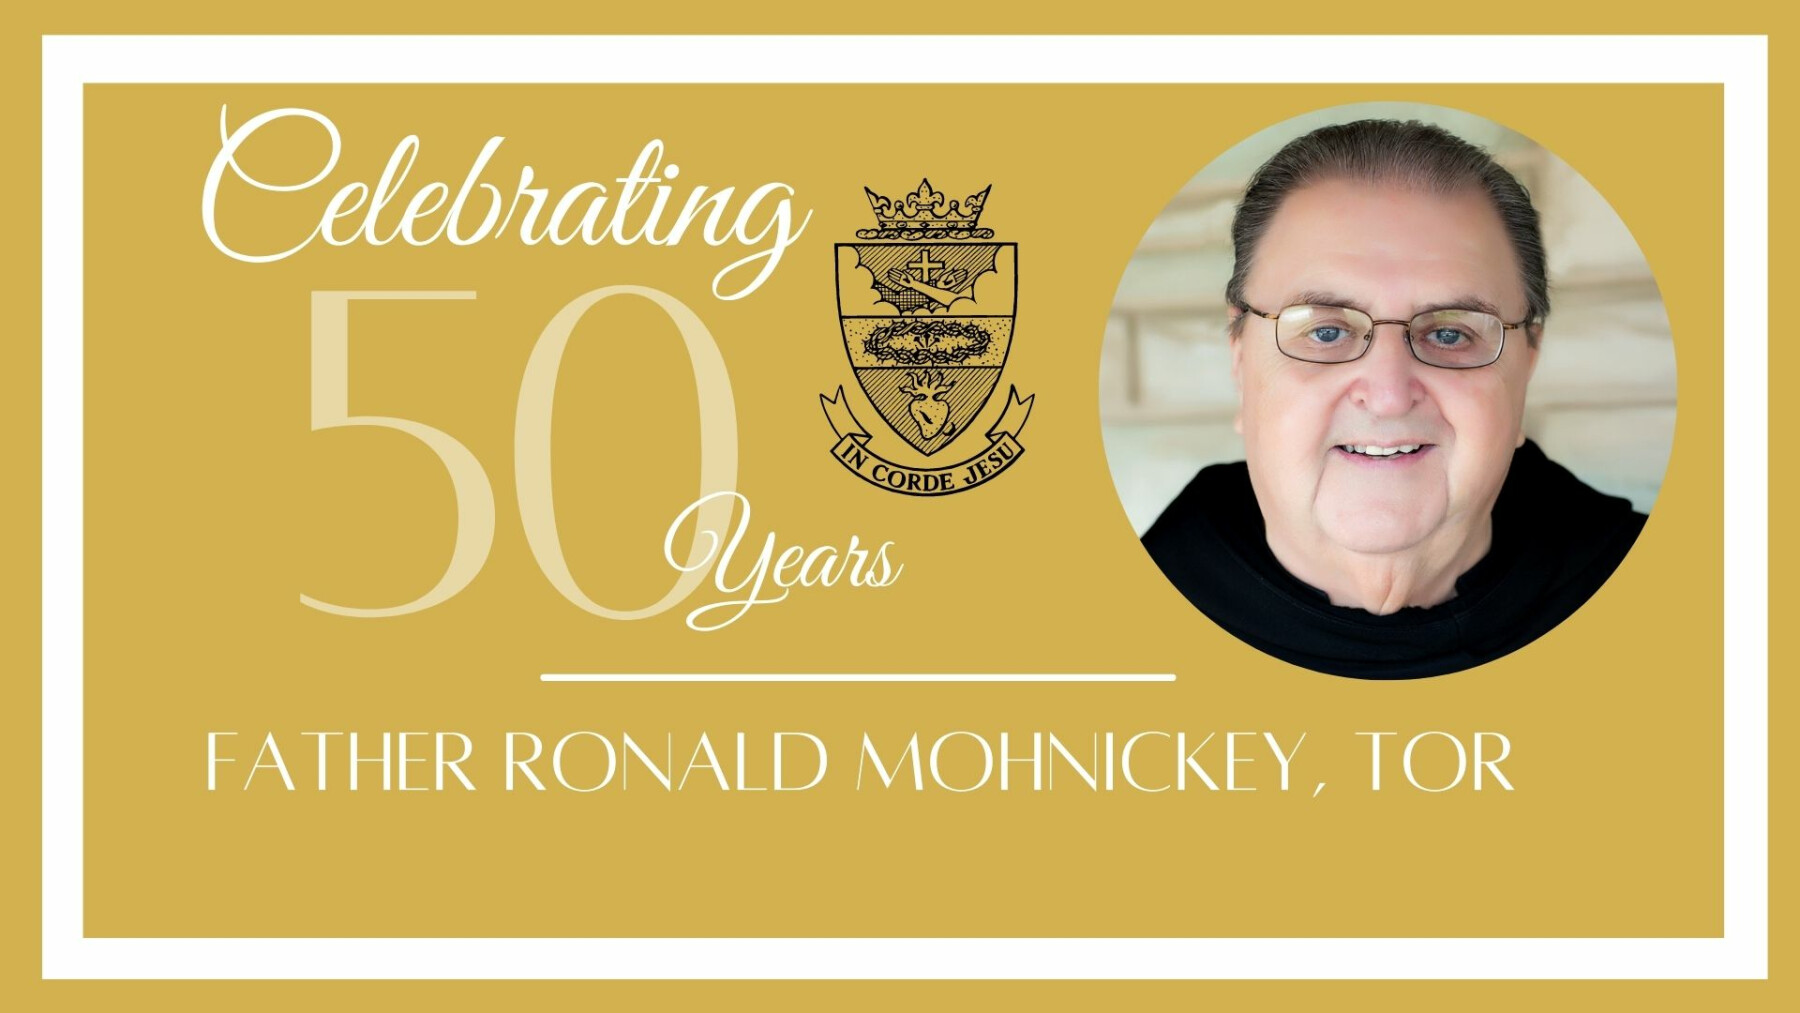 Celebration of Fr. Ronald's 50th Anniversary to the priesthood